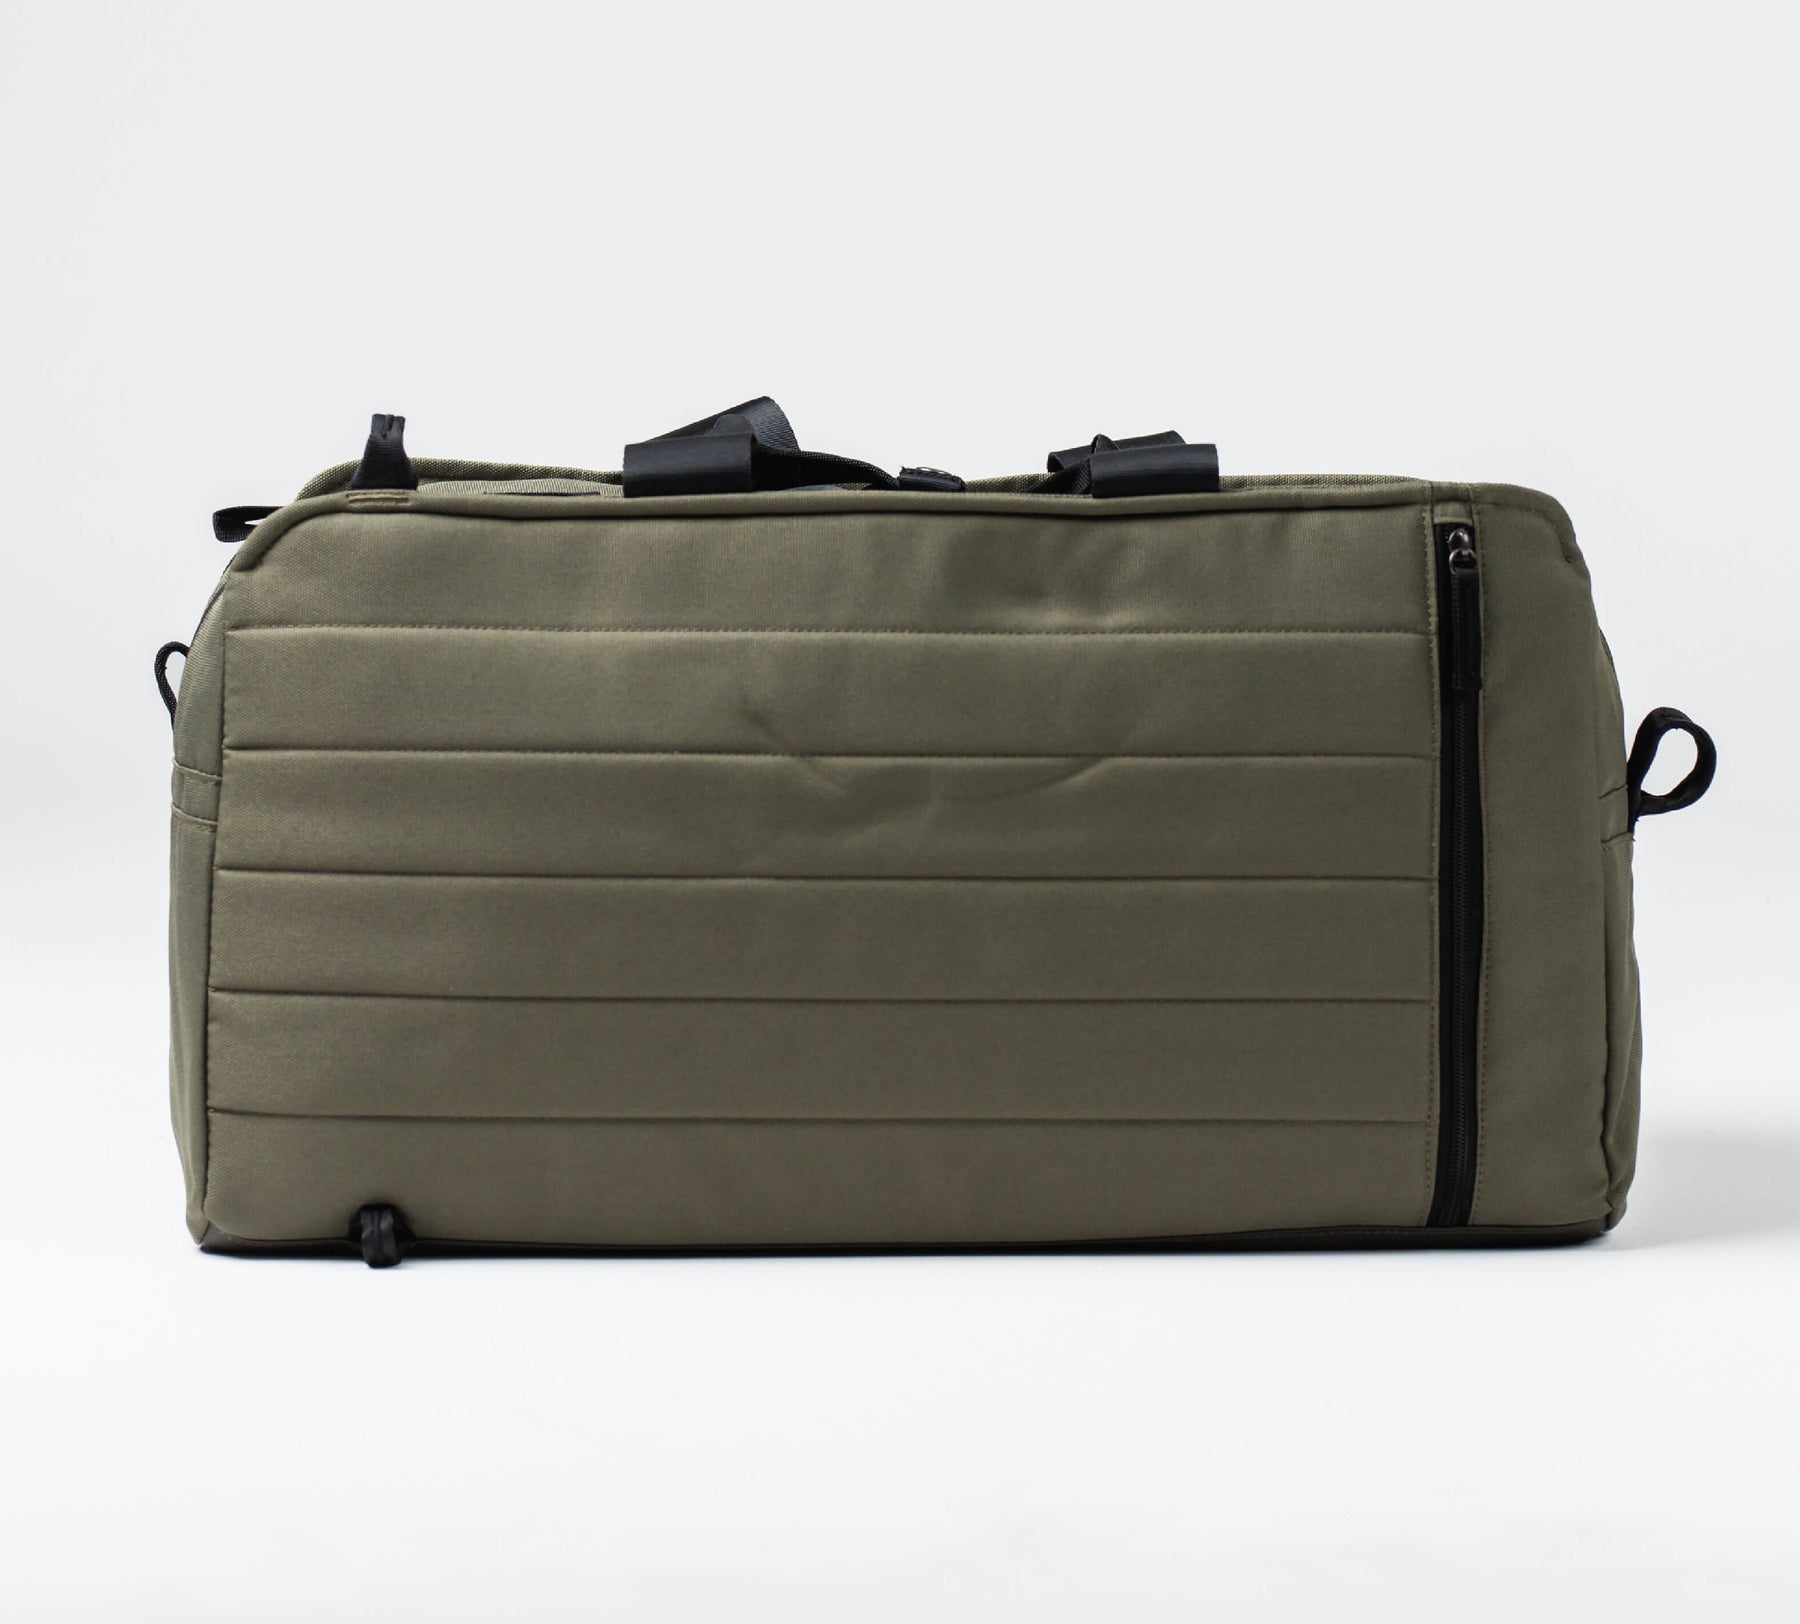 the exterior of the green colored 50L anywhere bag